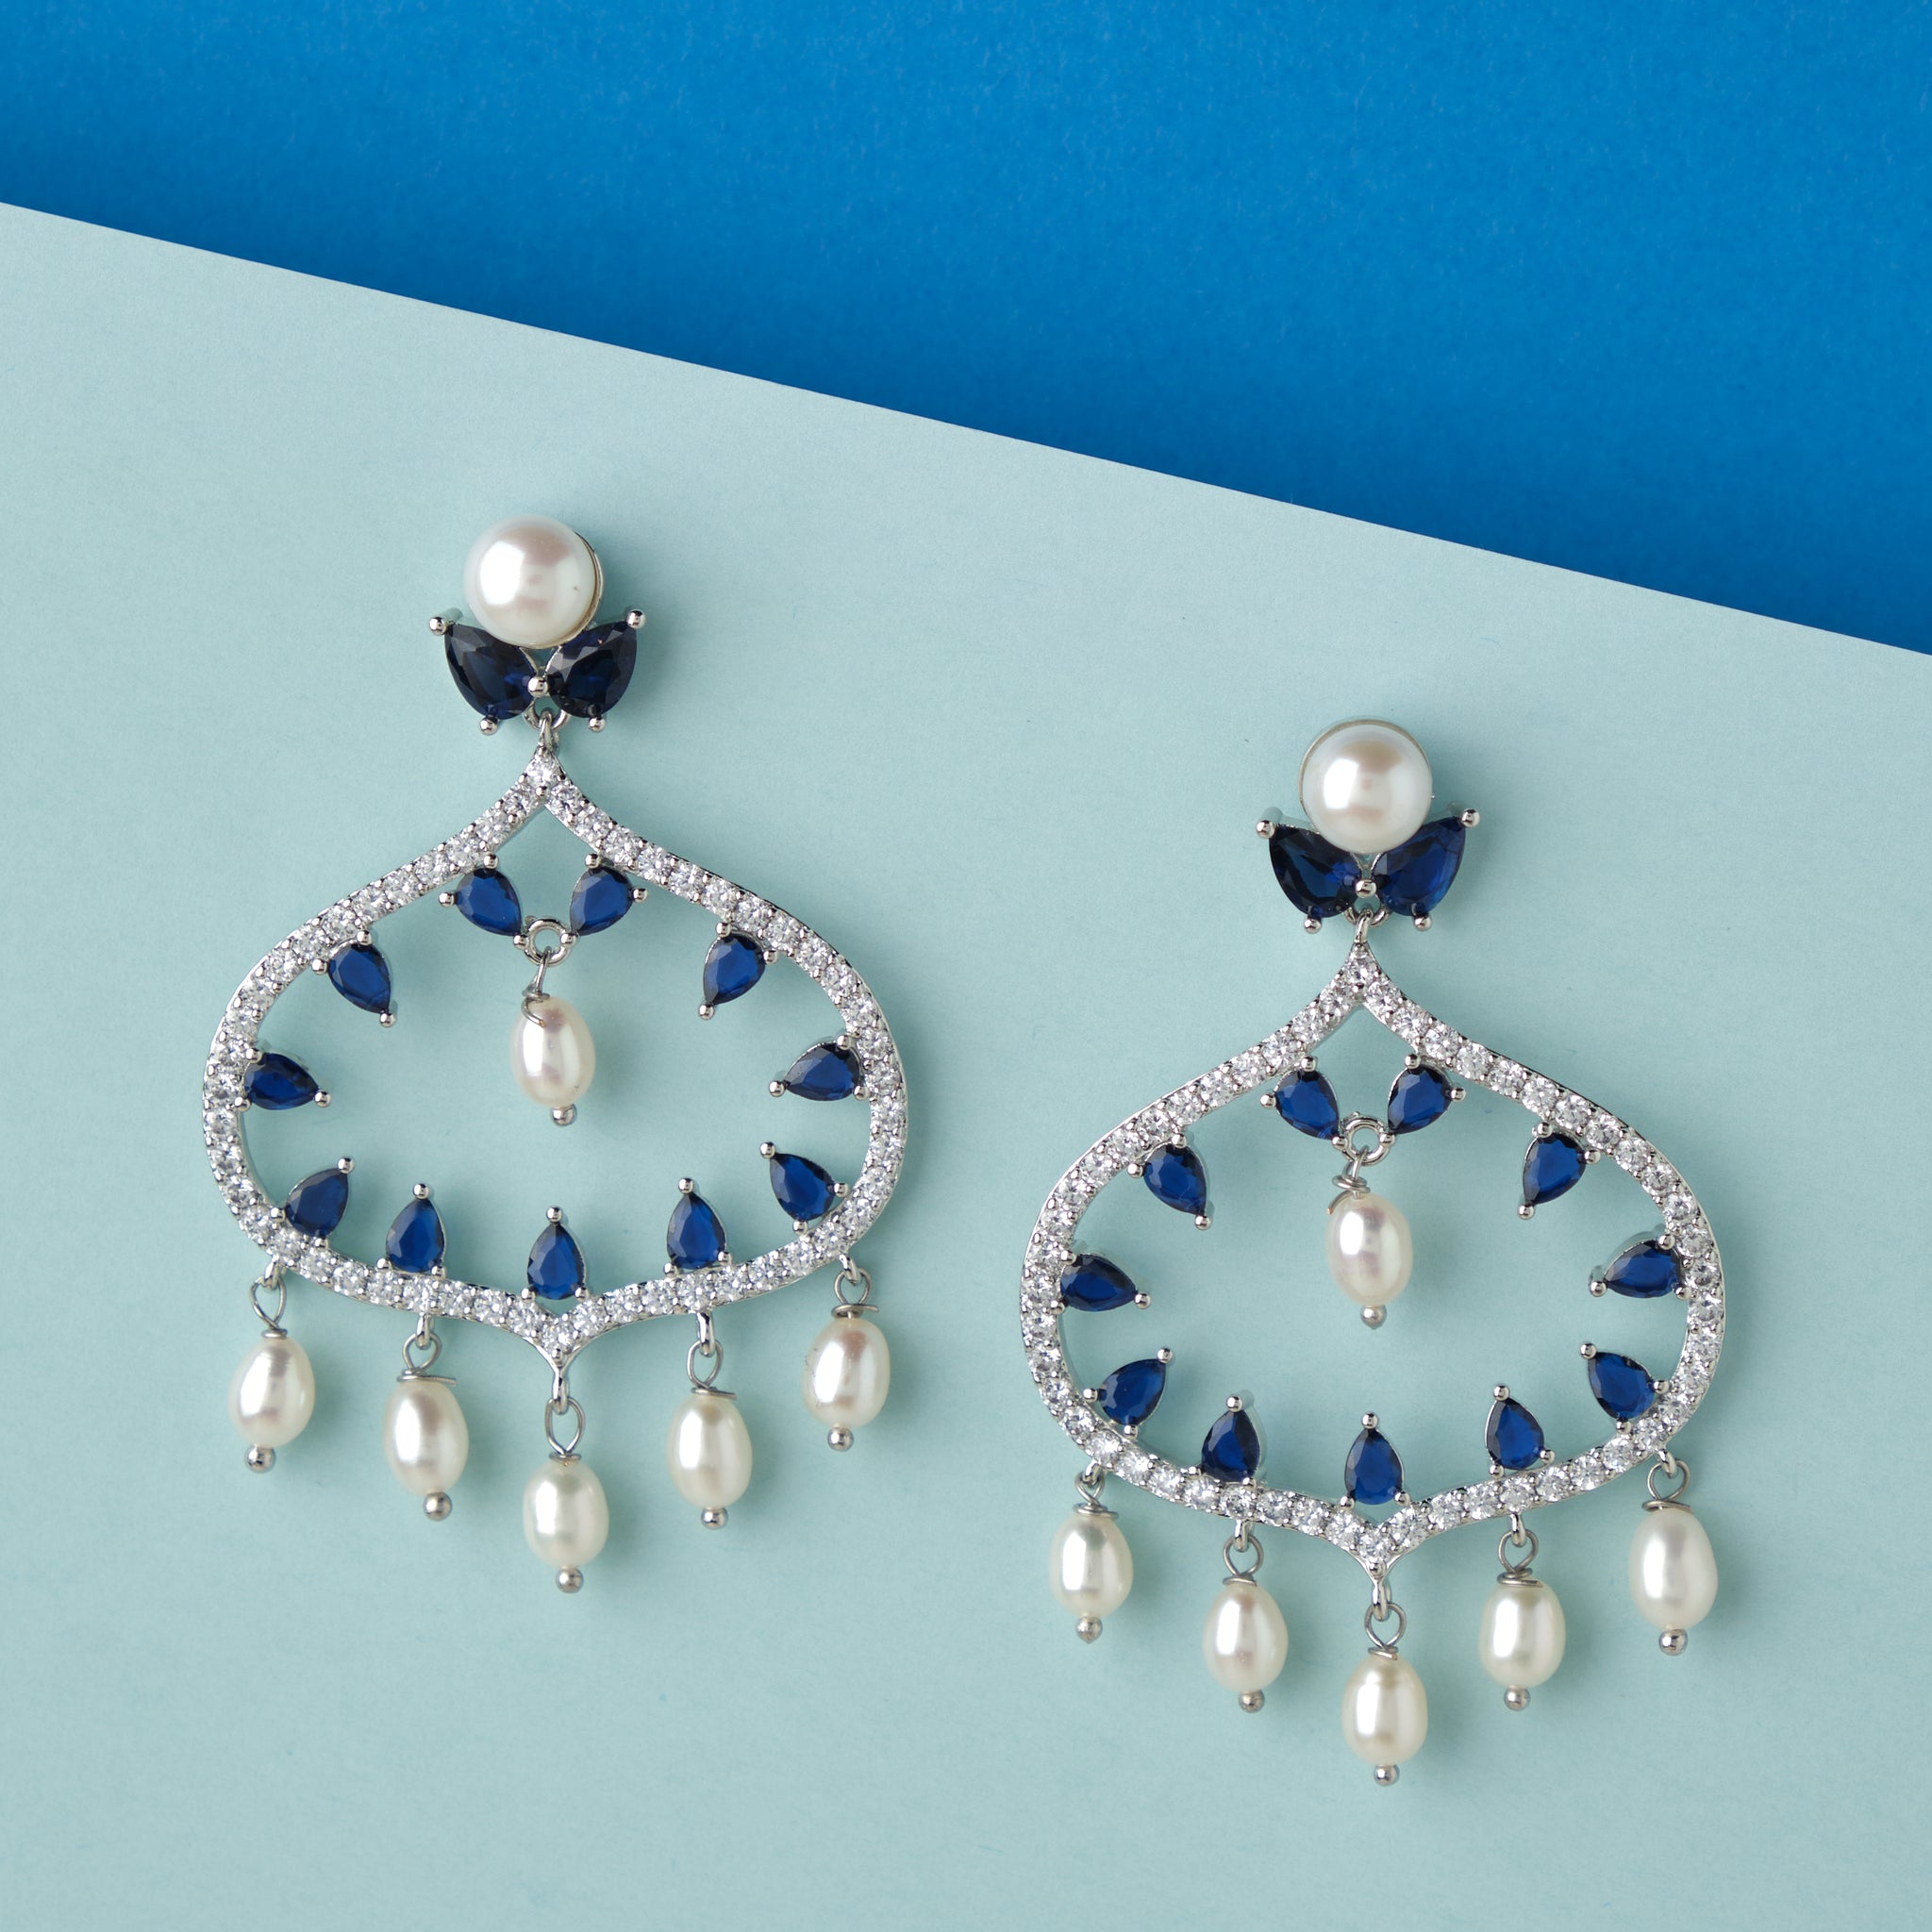 A pair of Ghazala Chand Bali Earrings with pearls and diamonds from Chandrani Pearls.